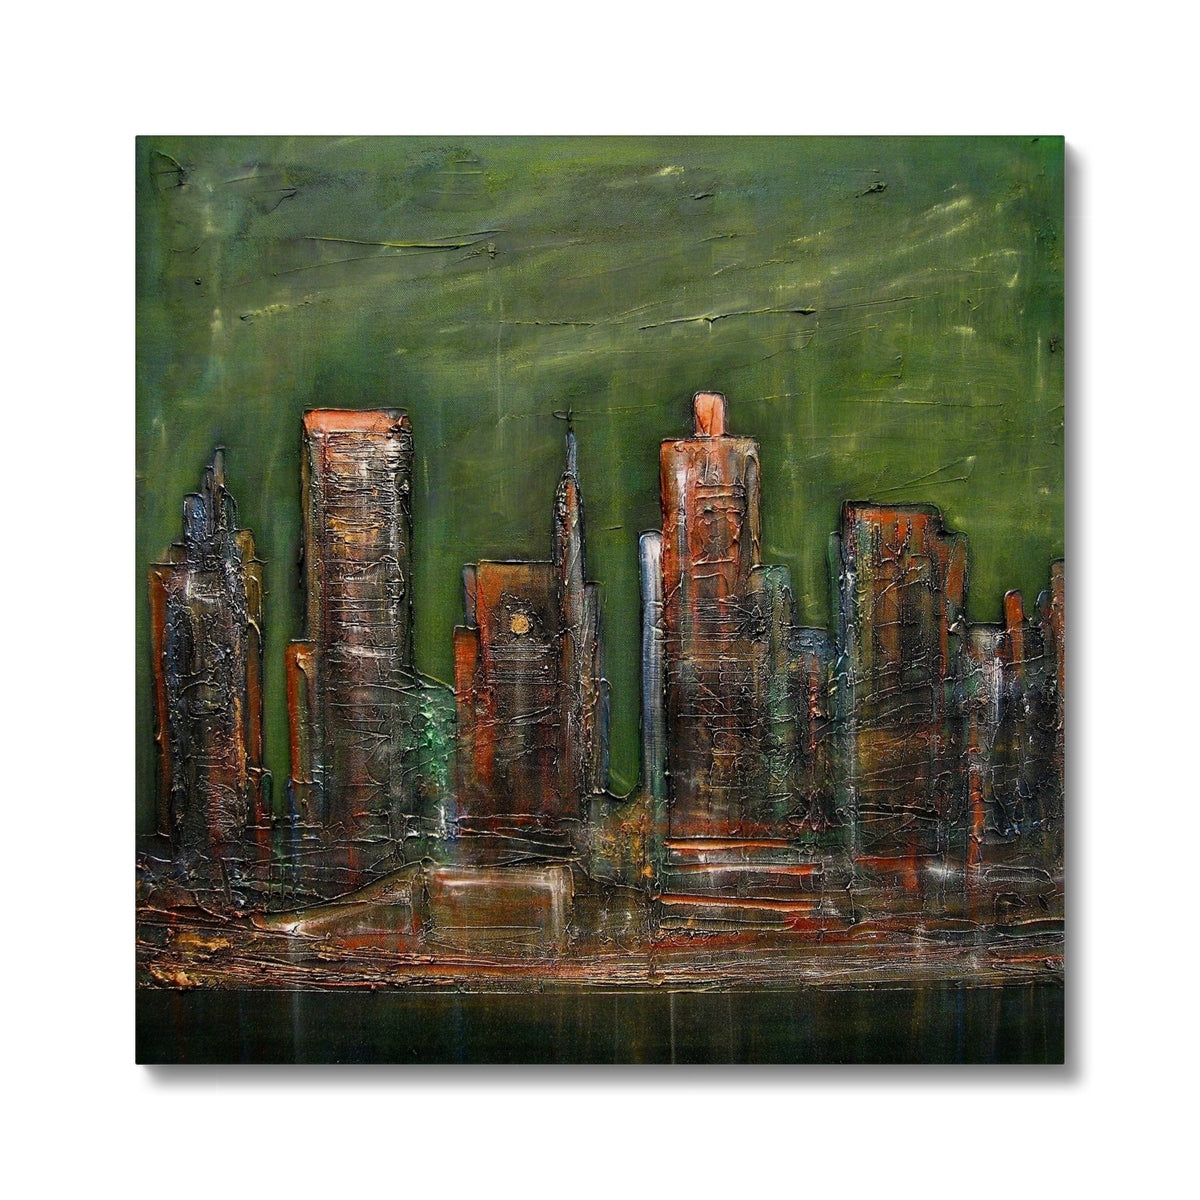 A Neon New York Painting | Canvas From Scotland-Contemporary Stretched Canvas Prints-World Art Gallery-24"x24"-Paintings, Prints, Homeware, Art Gifts From Scotland By Scottish Artist Kevin Hunter